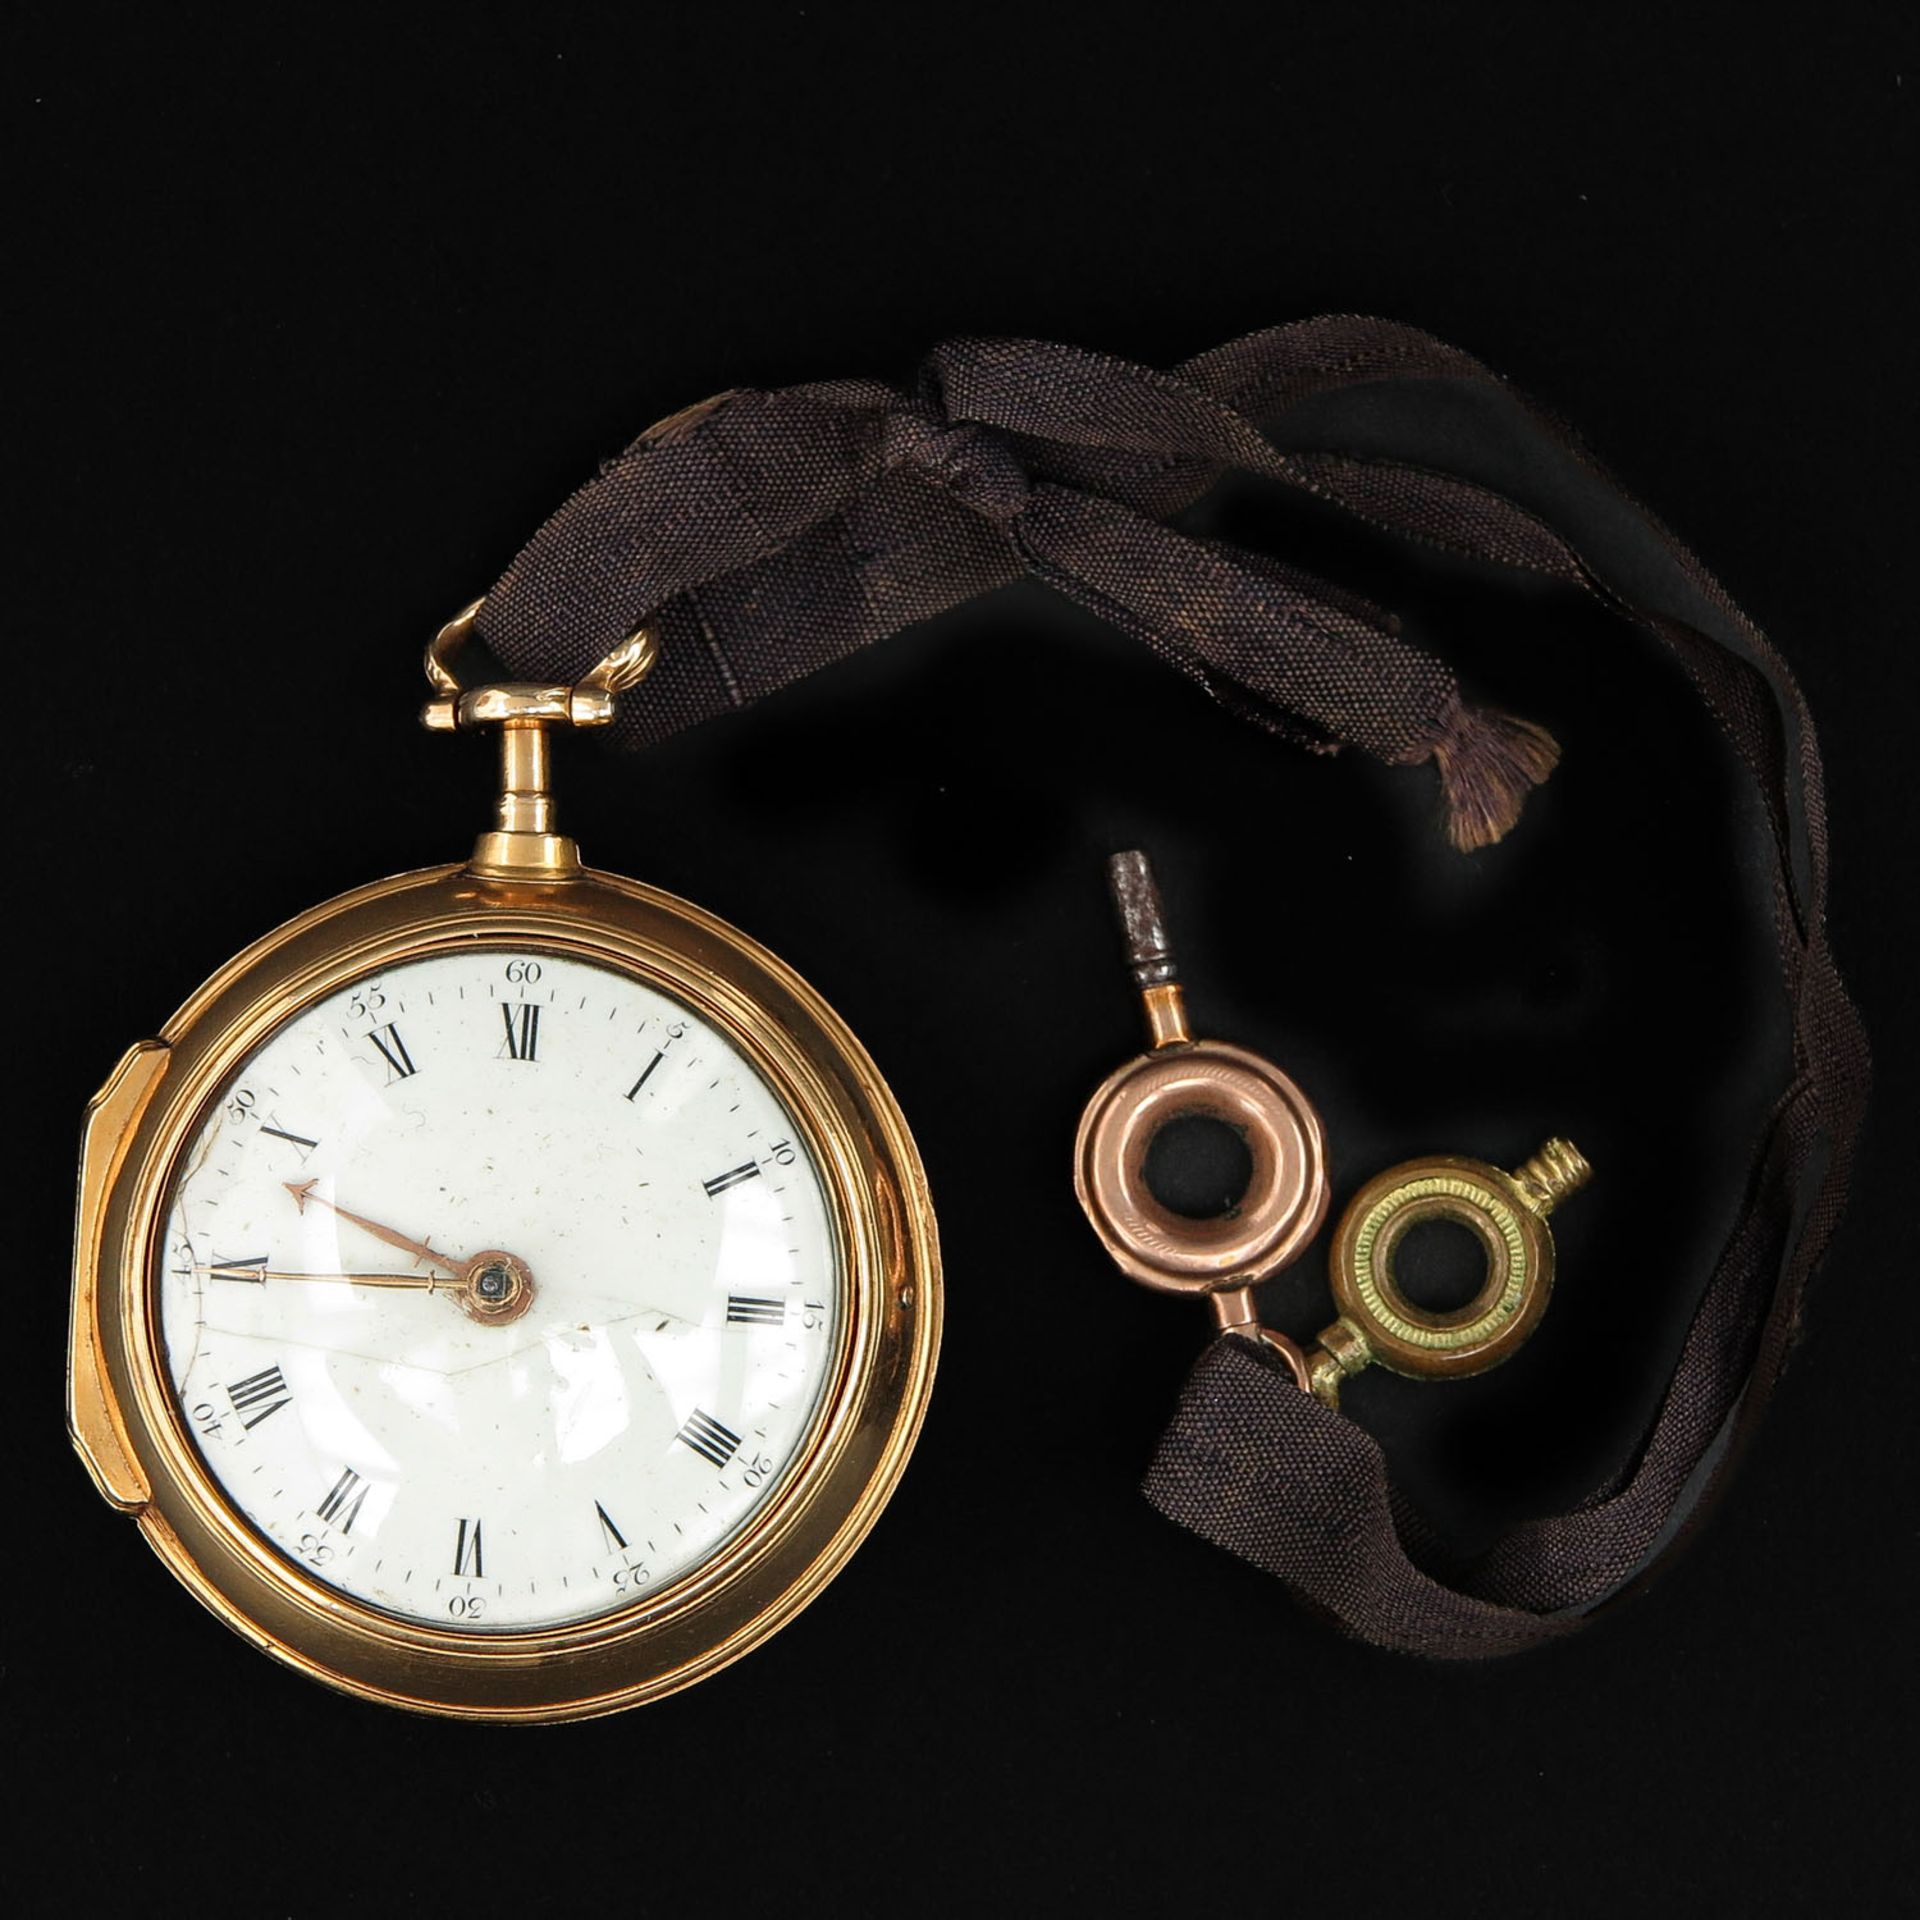 An 18KG Pocket Watch by Thomas Wiswall London